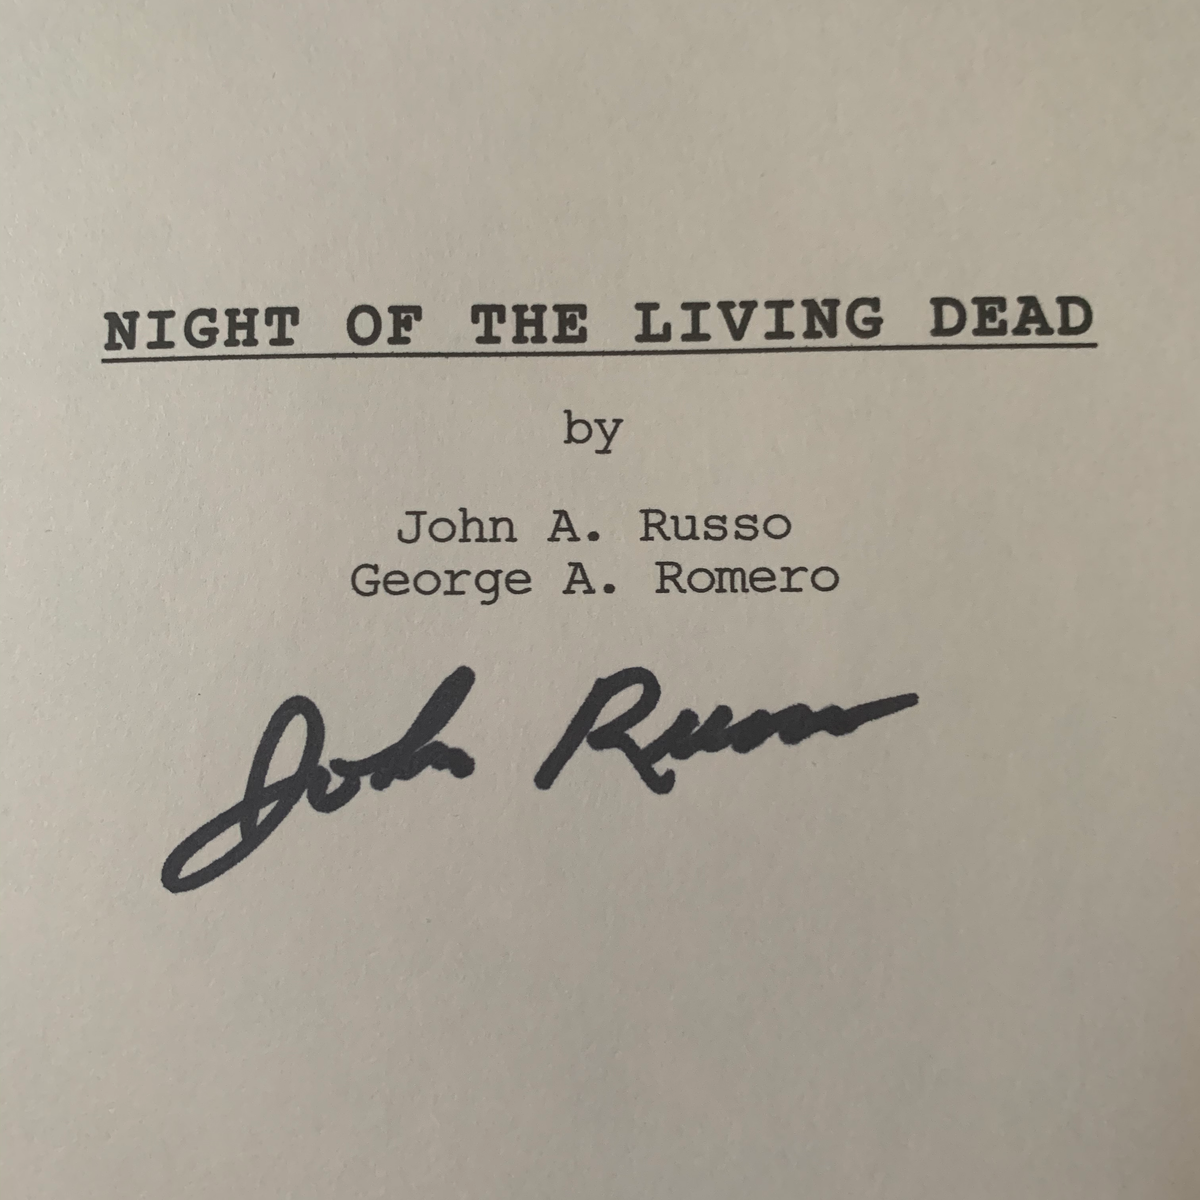 Return of the Living Dead by John Russo